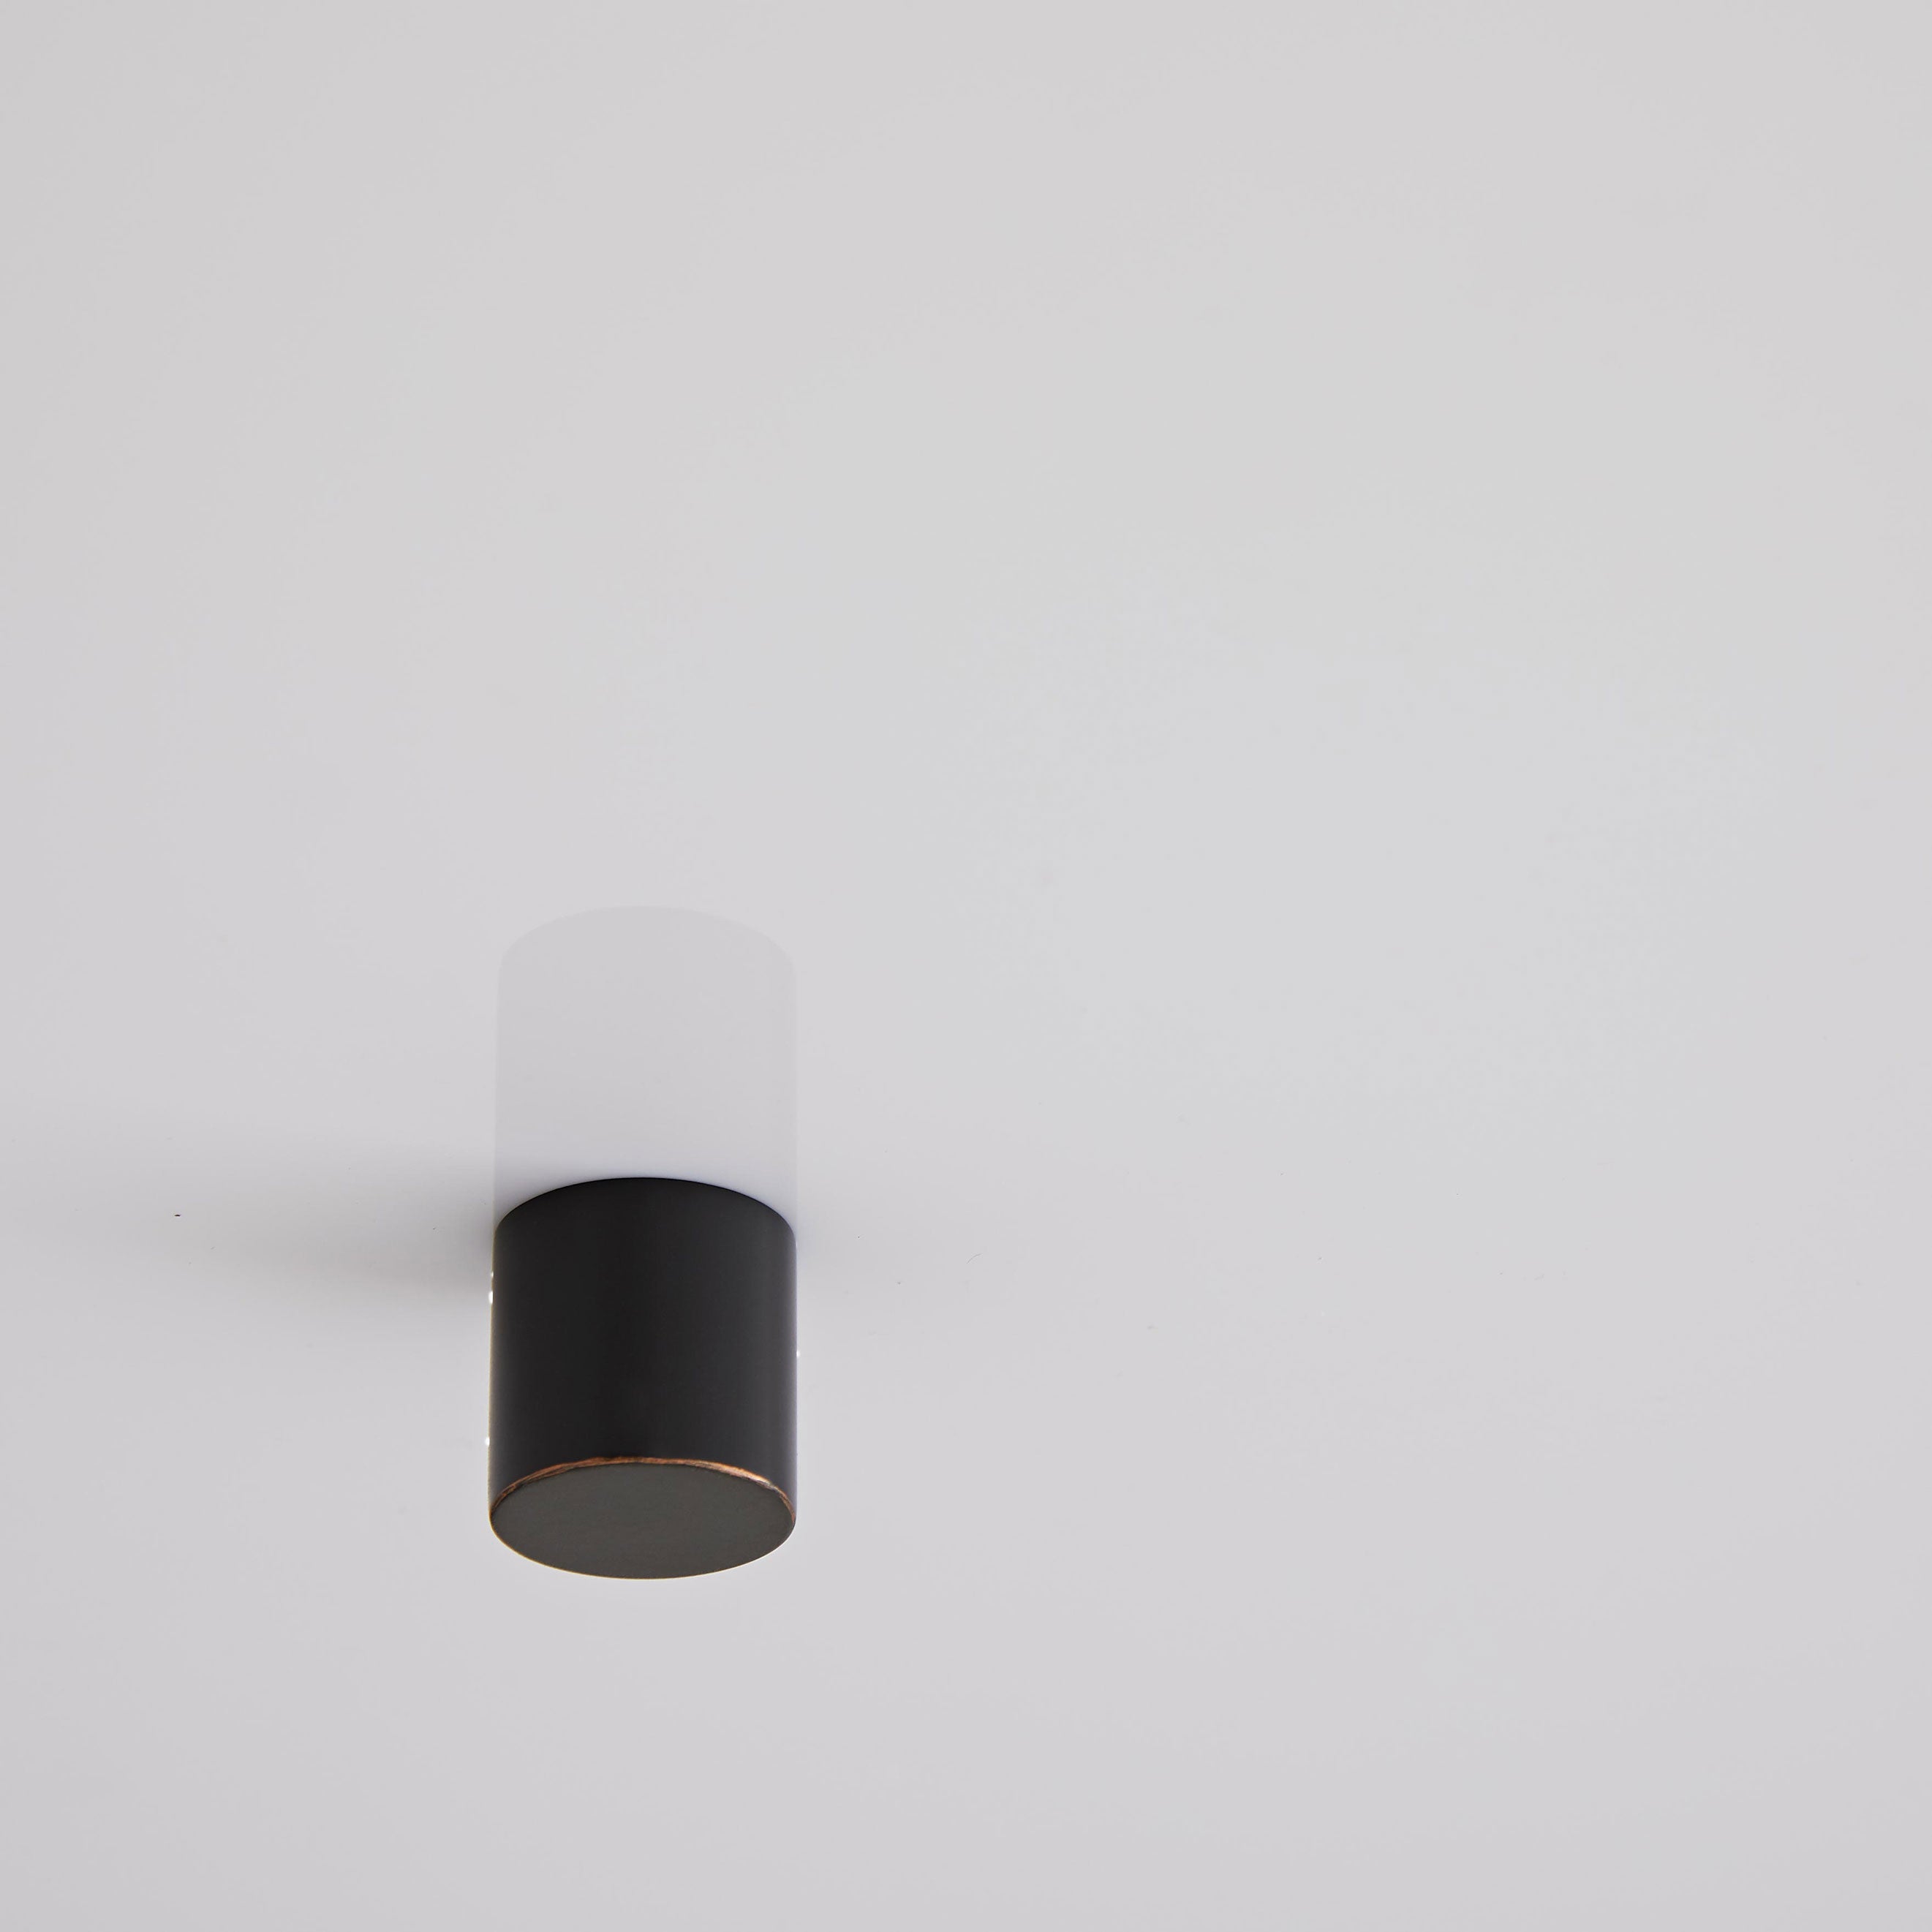 Black and white cylindrical object resembling a modern lamp fixture.